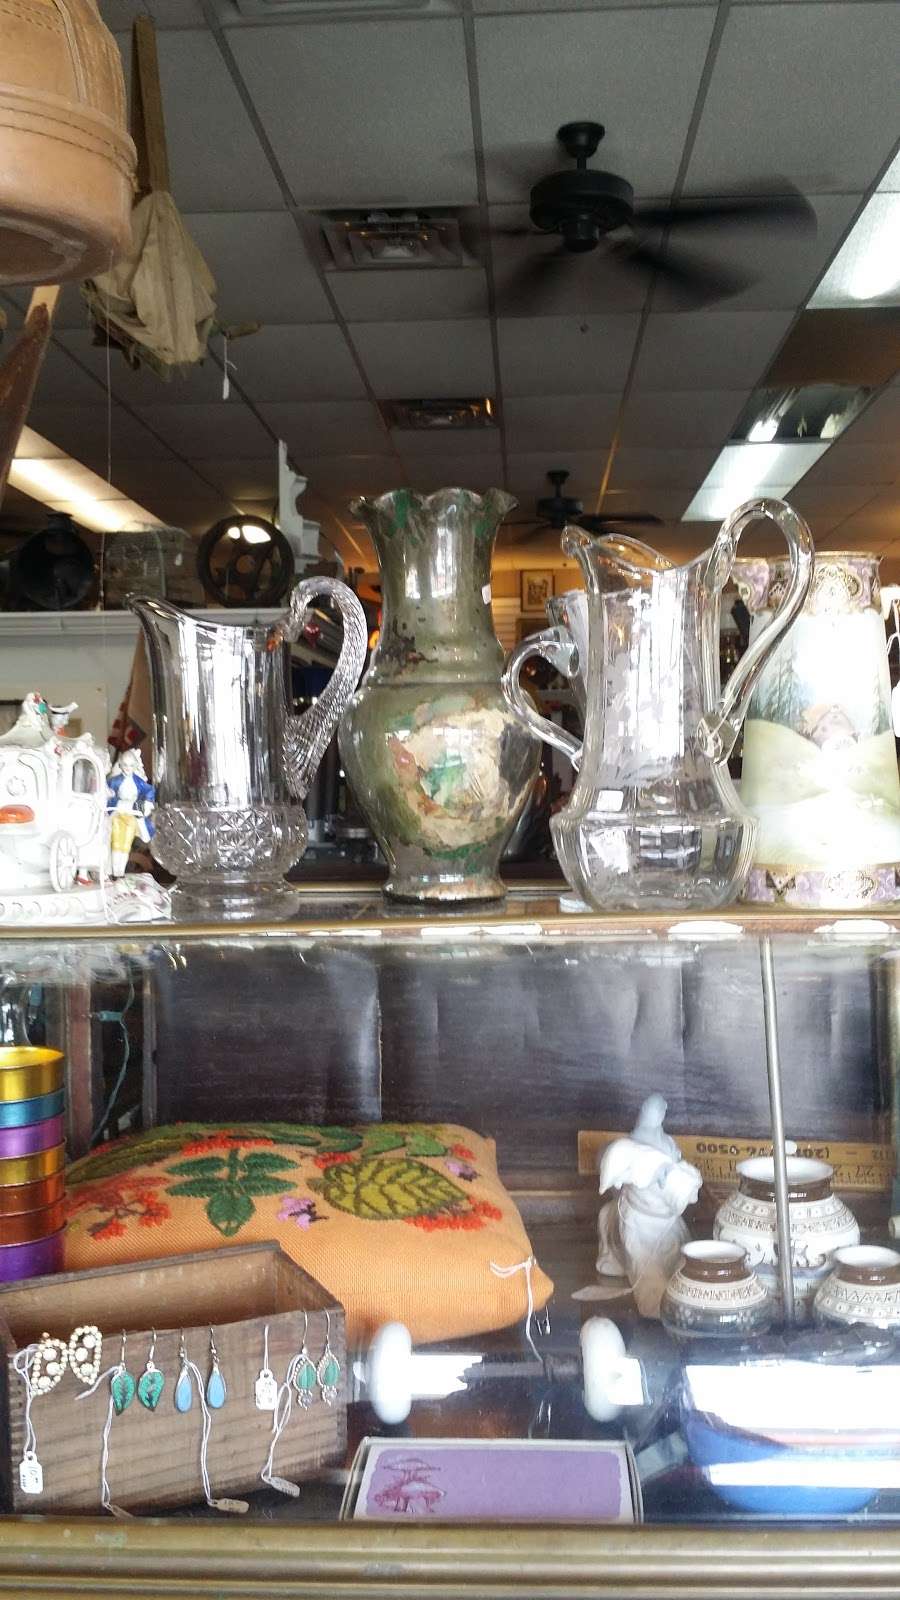 A Pickers Find | 1098 Texas Palmyra Hwy #101, Honesdale, PA 18431, USA | Phone: (570) 253-0207